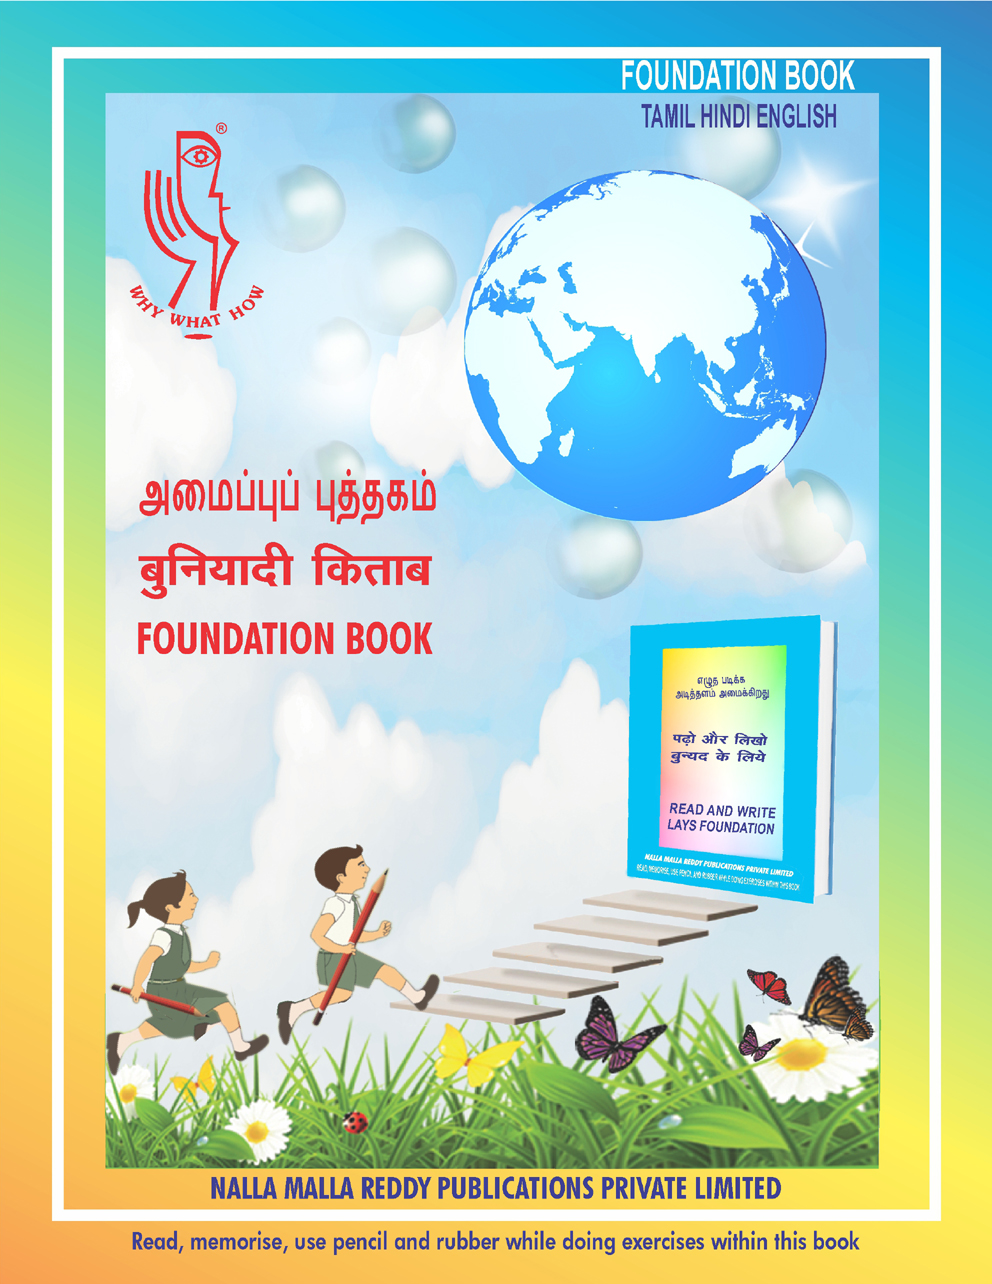 Tamil Hindi English Foundation Book page 2 in 1 website